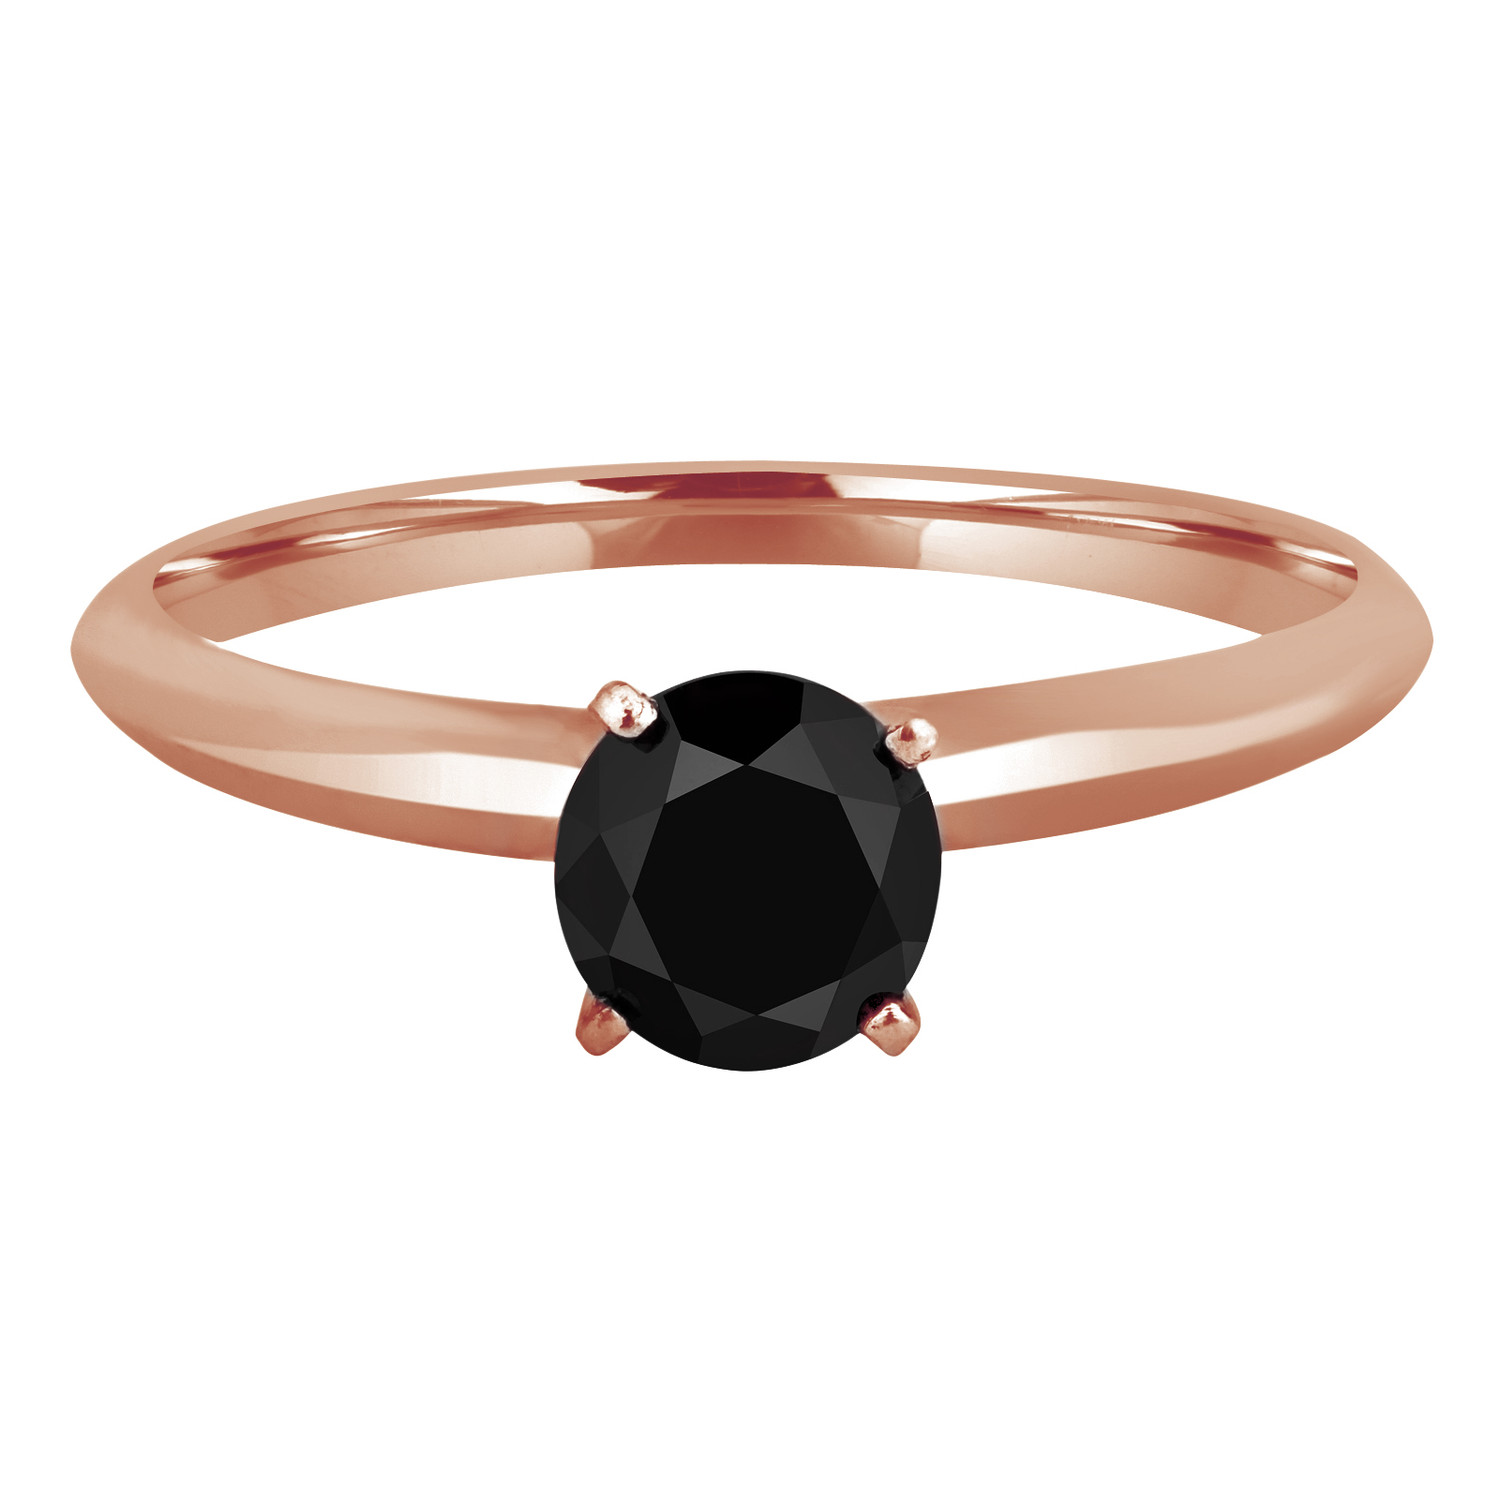 Round Black Diamond Solitaire Engagement Ring in Rose Gold (MVSBL0001-R)